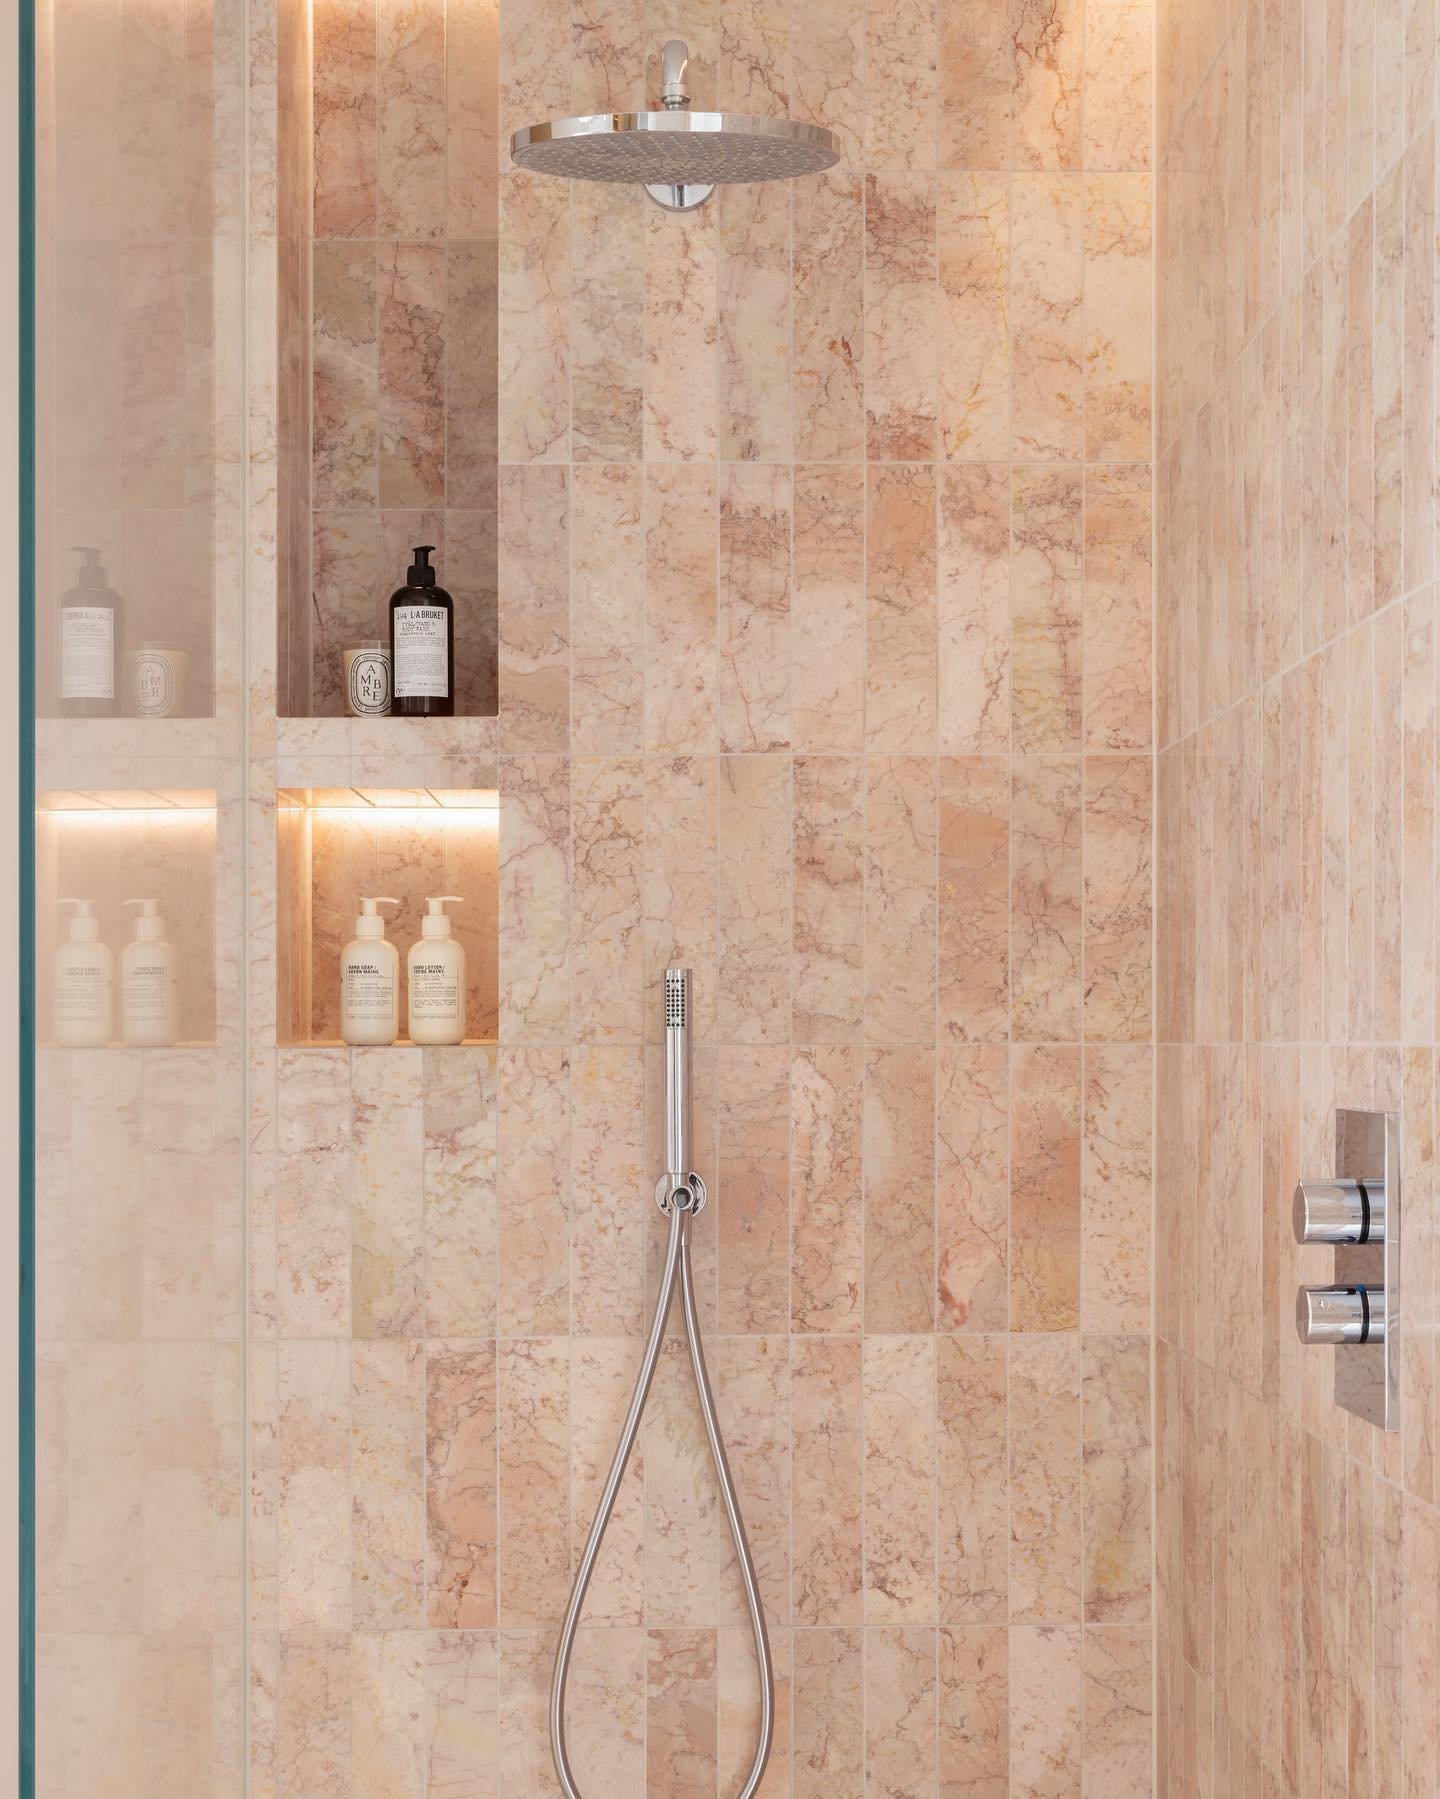 Don&rsquo;t settle for boring when it comes to your bathroom tiles! 

The way you lay them can dramatically impact the entire look and feel of the space. Sure, there are classic options like vertical stack bond (sleek &amp; modern), herringbone (adds